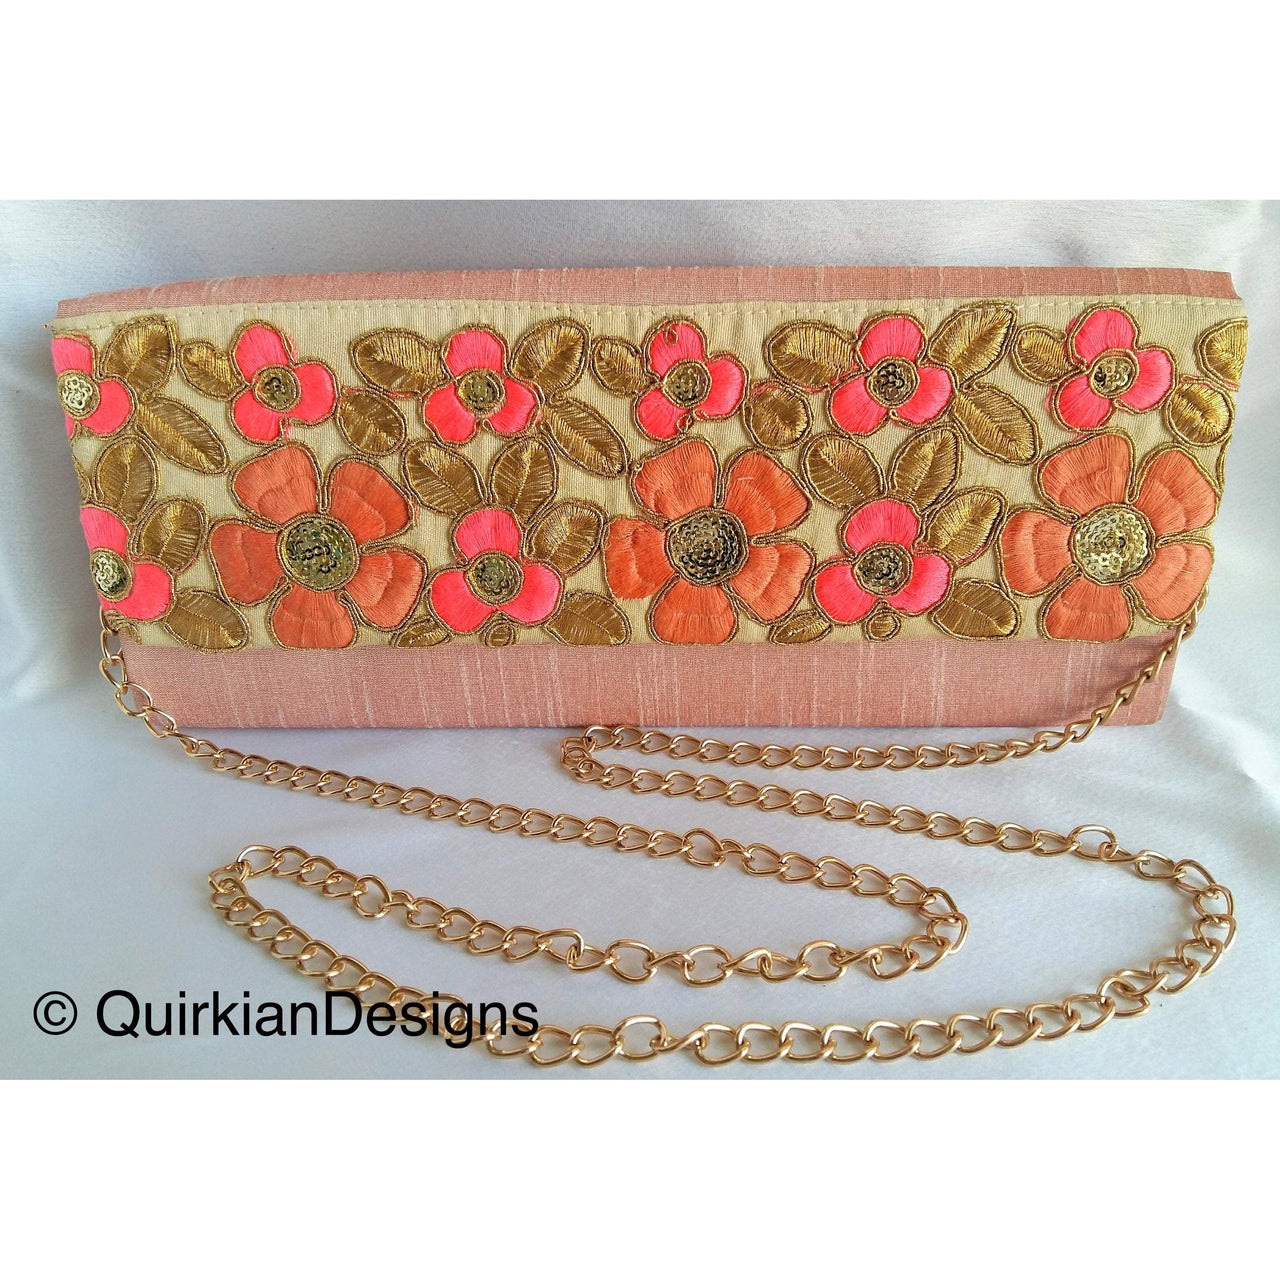 Coral Pink Fabric Clutch Purse With Pink And Gold Intricate Floral Embroidery, Wedding Clutch, Party Bag